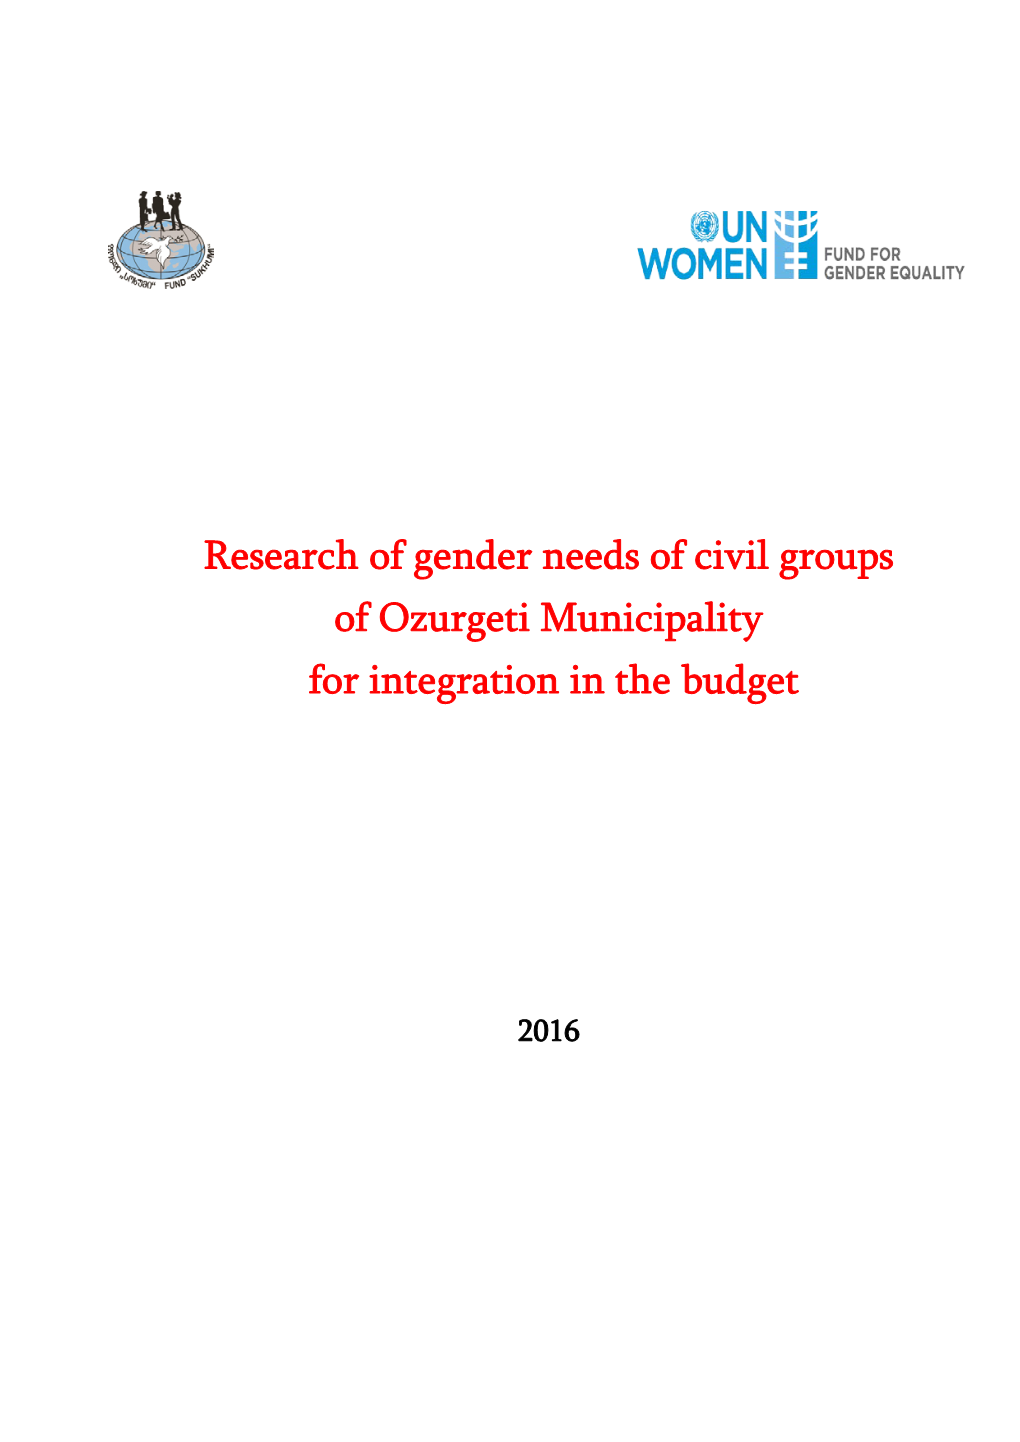 Research of Gender Needs of Civil Groups of Ozurgeti Municipality for Integration in the Budget